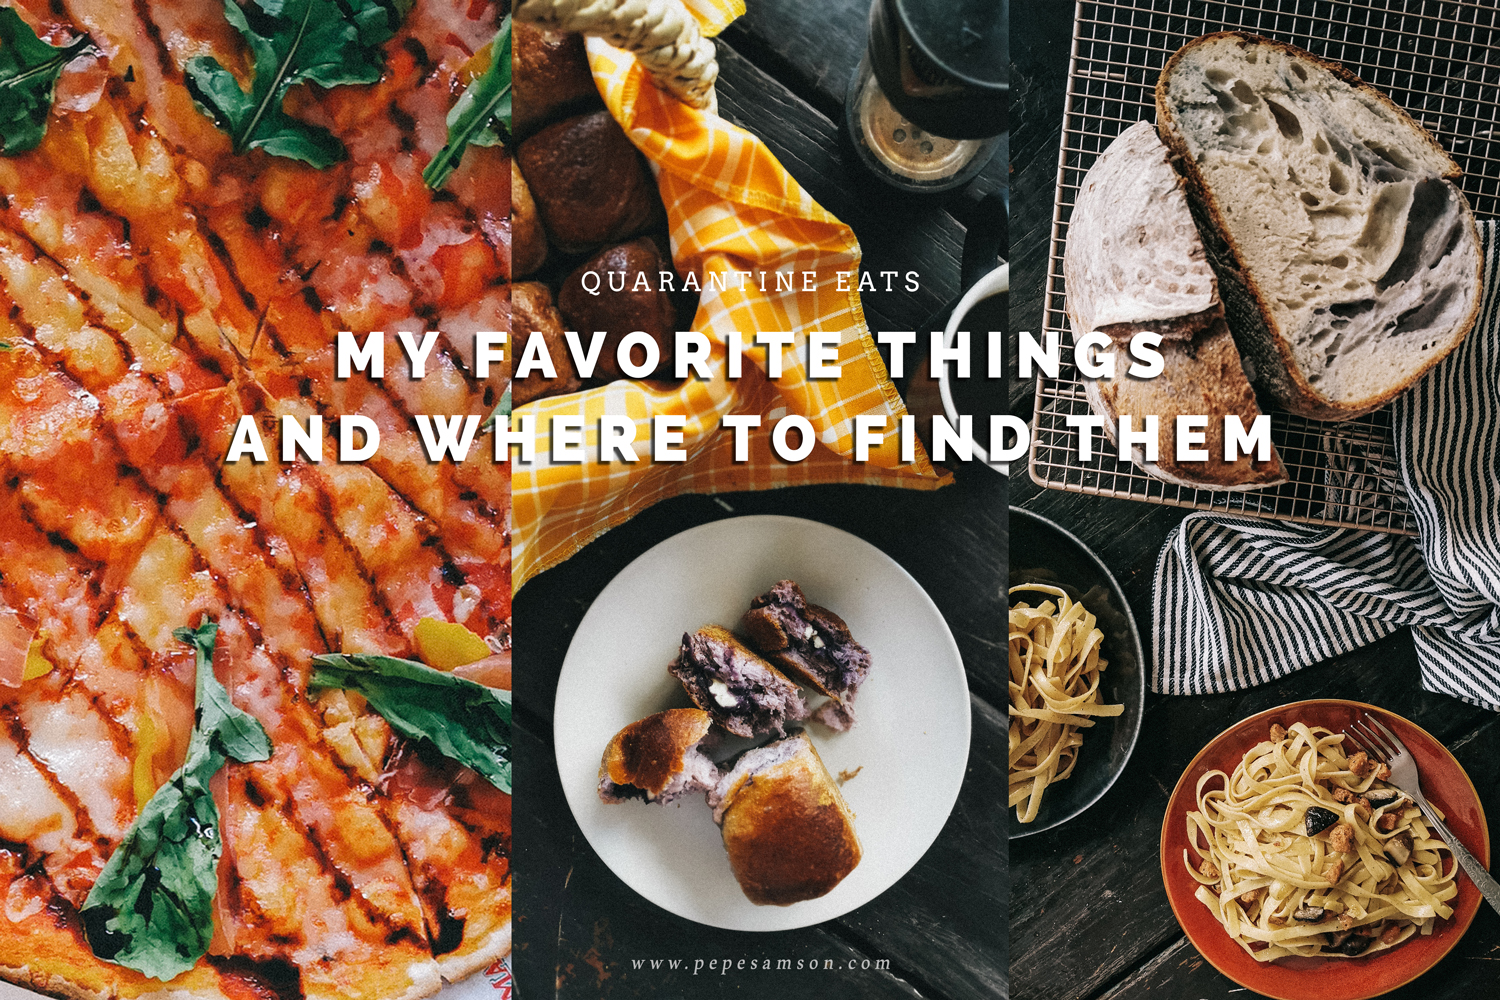 Quarantine Eats: 6 of My Favorite Things and Where to Find Them